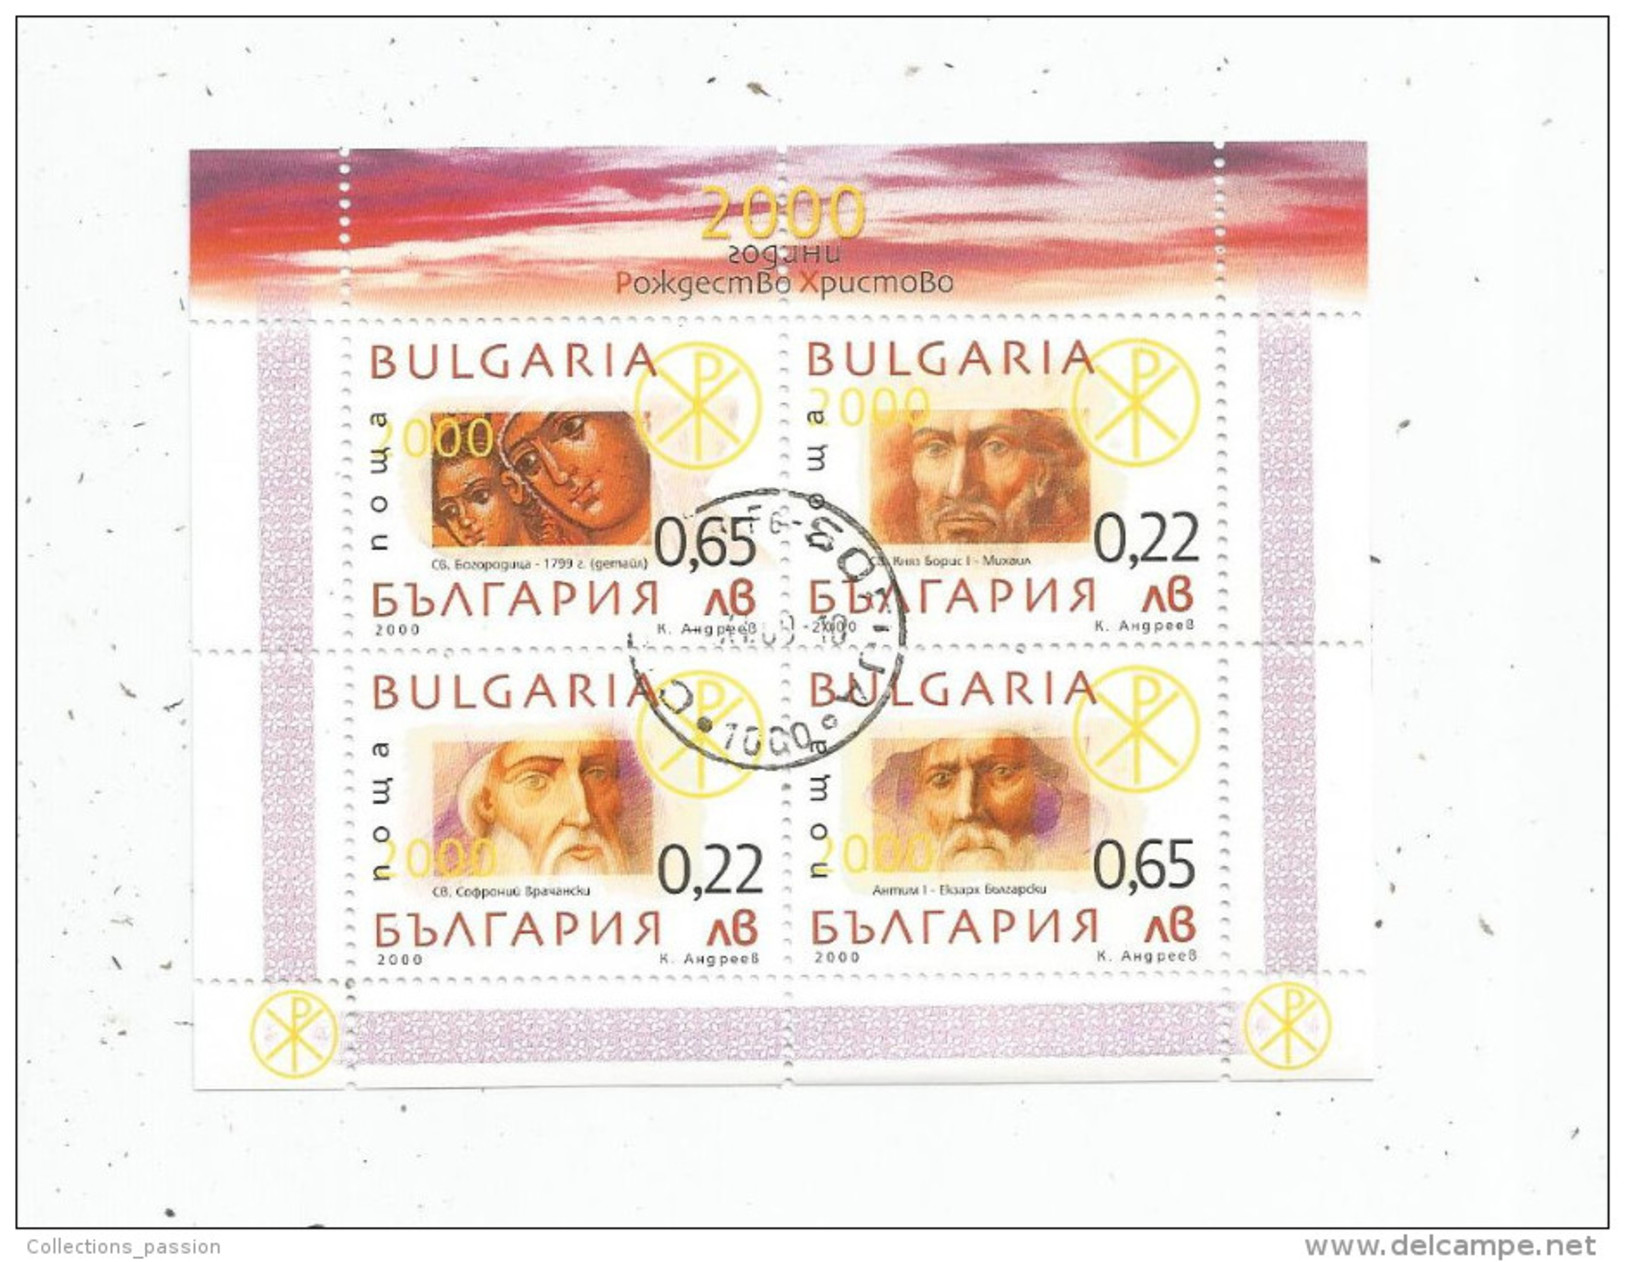 Timbre , BULGARIE , BULGARIA , 0.65 , 0.22 , Bloc De 4 TIMBRES - Used Stamps